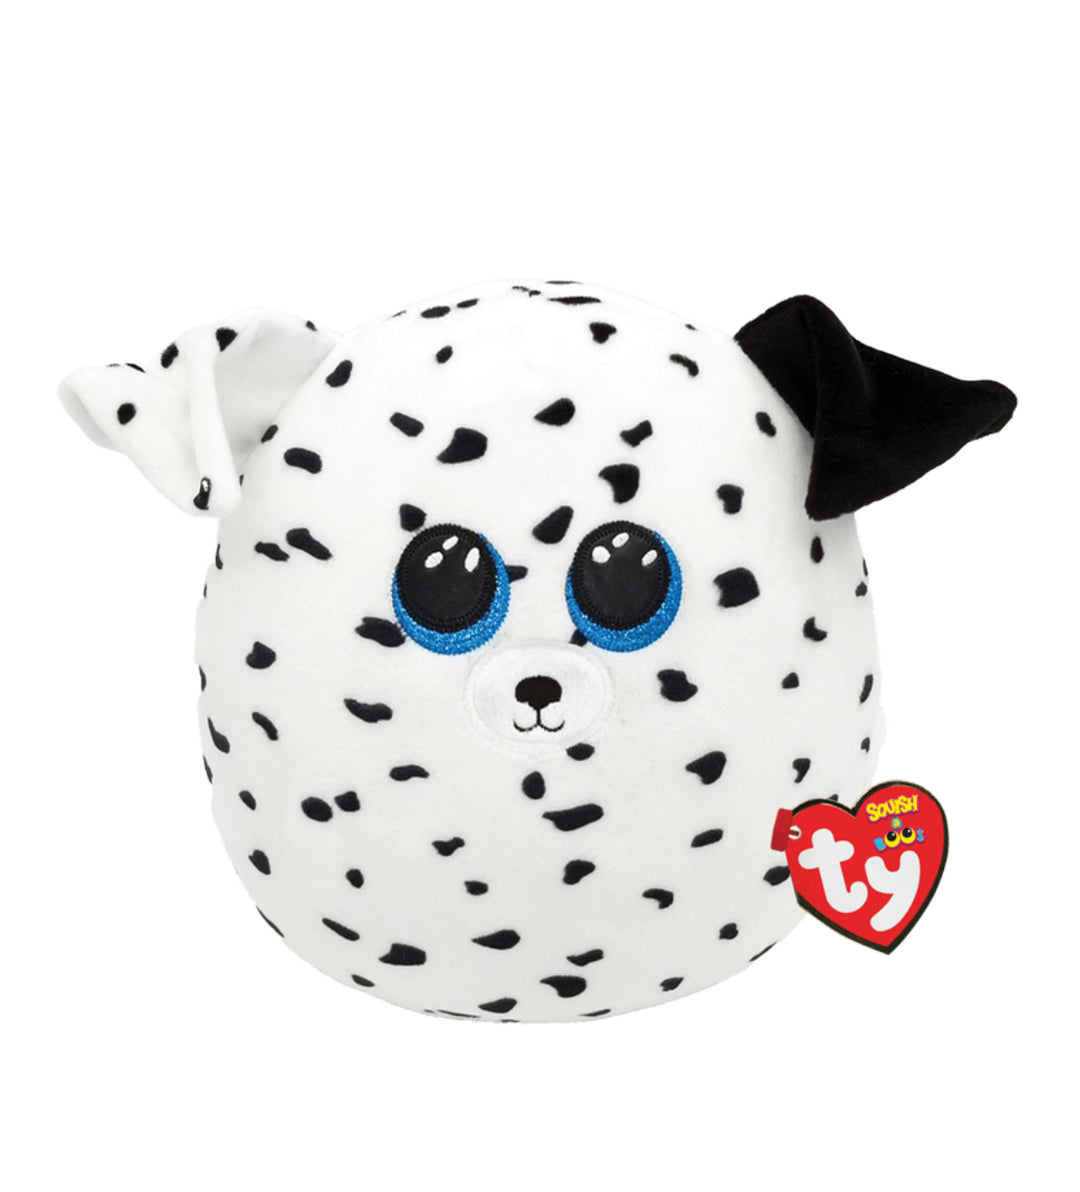 TY Large Squishy Beanies Stuffed Animal, Fetch-240 Kids-Inspired by Justeen-Women's Clothing Boutique in Chicago, Illinois